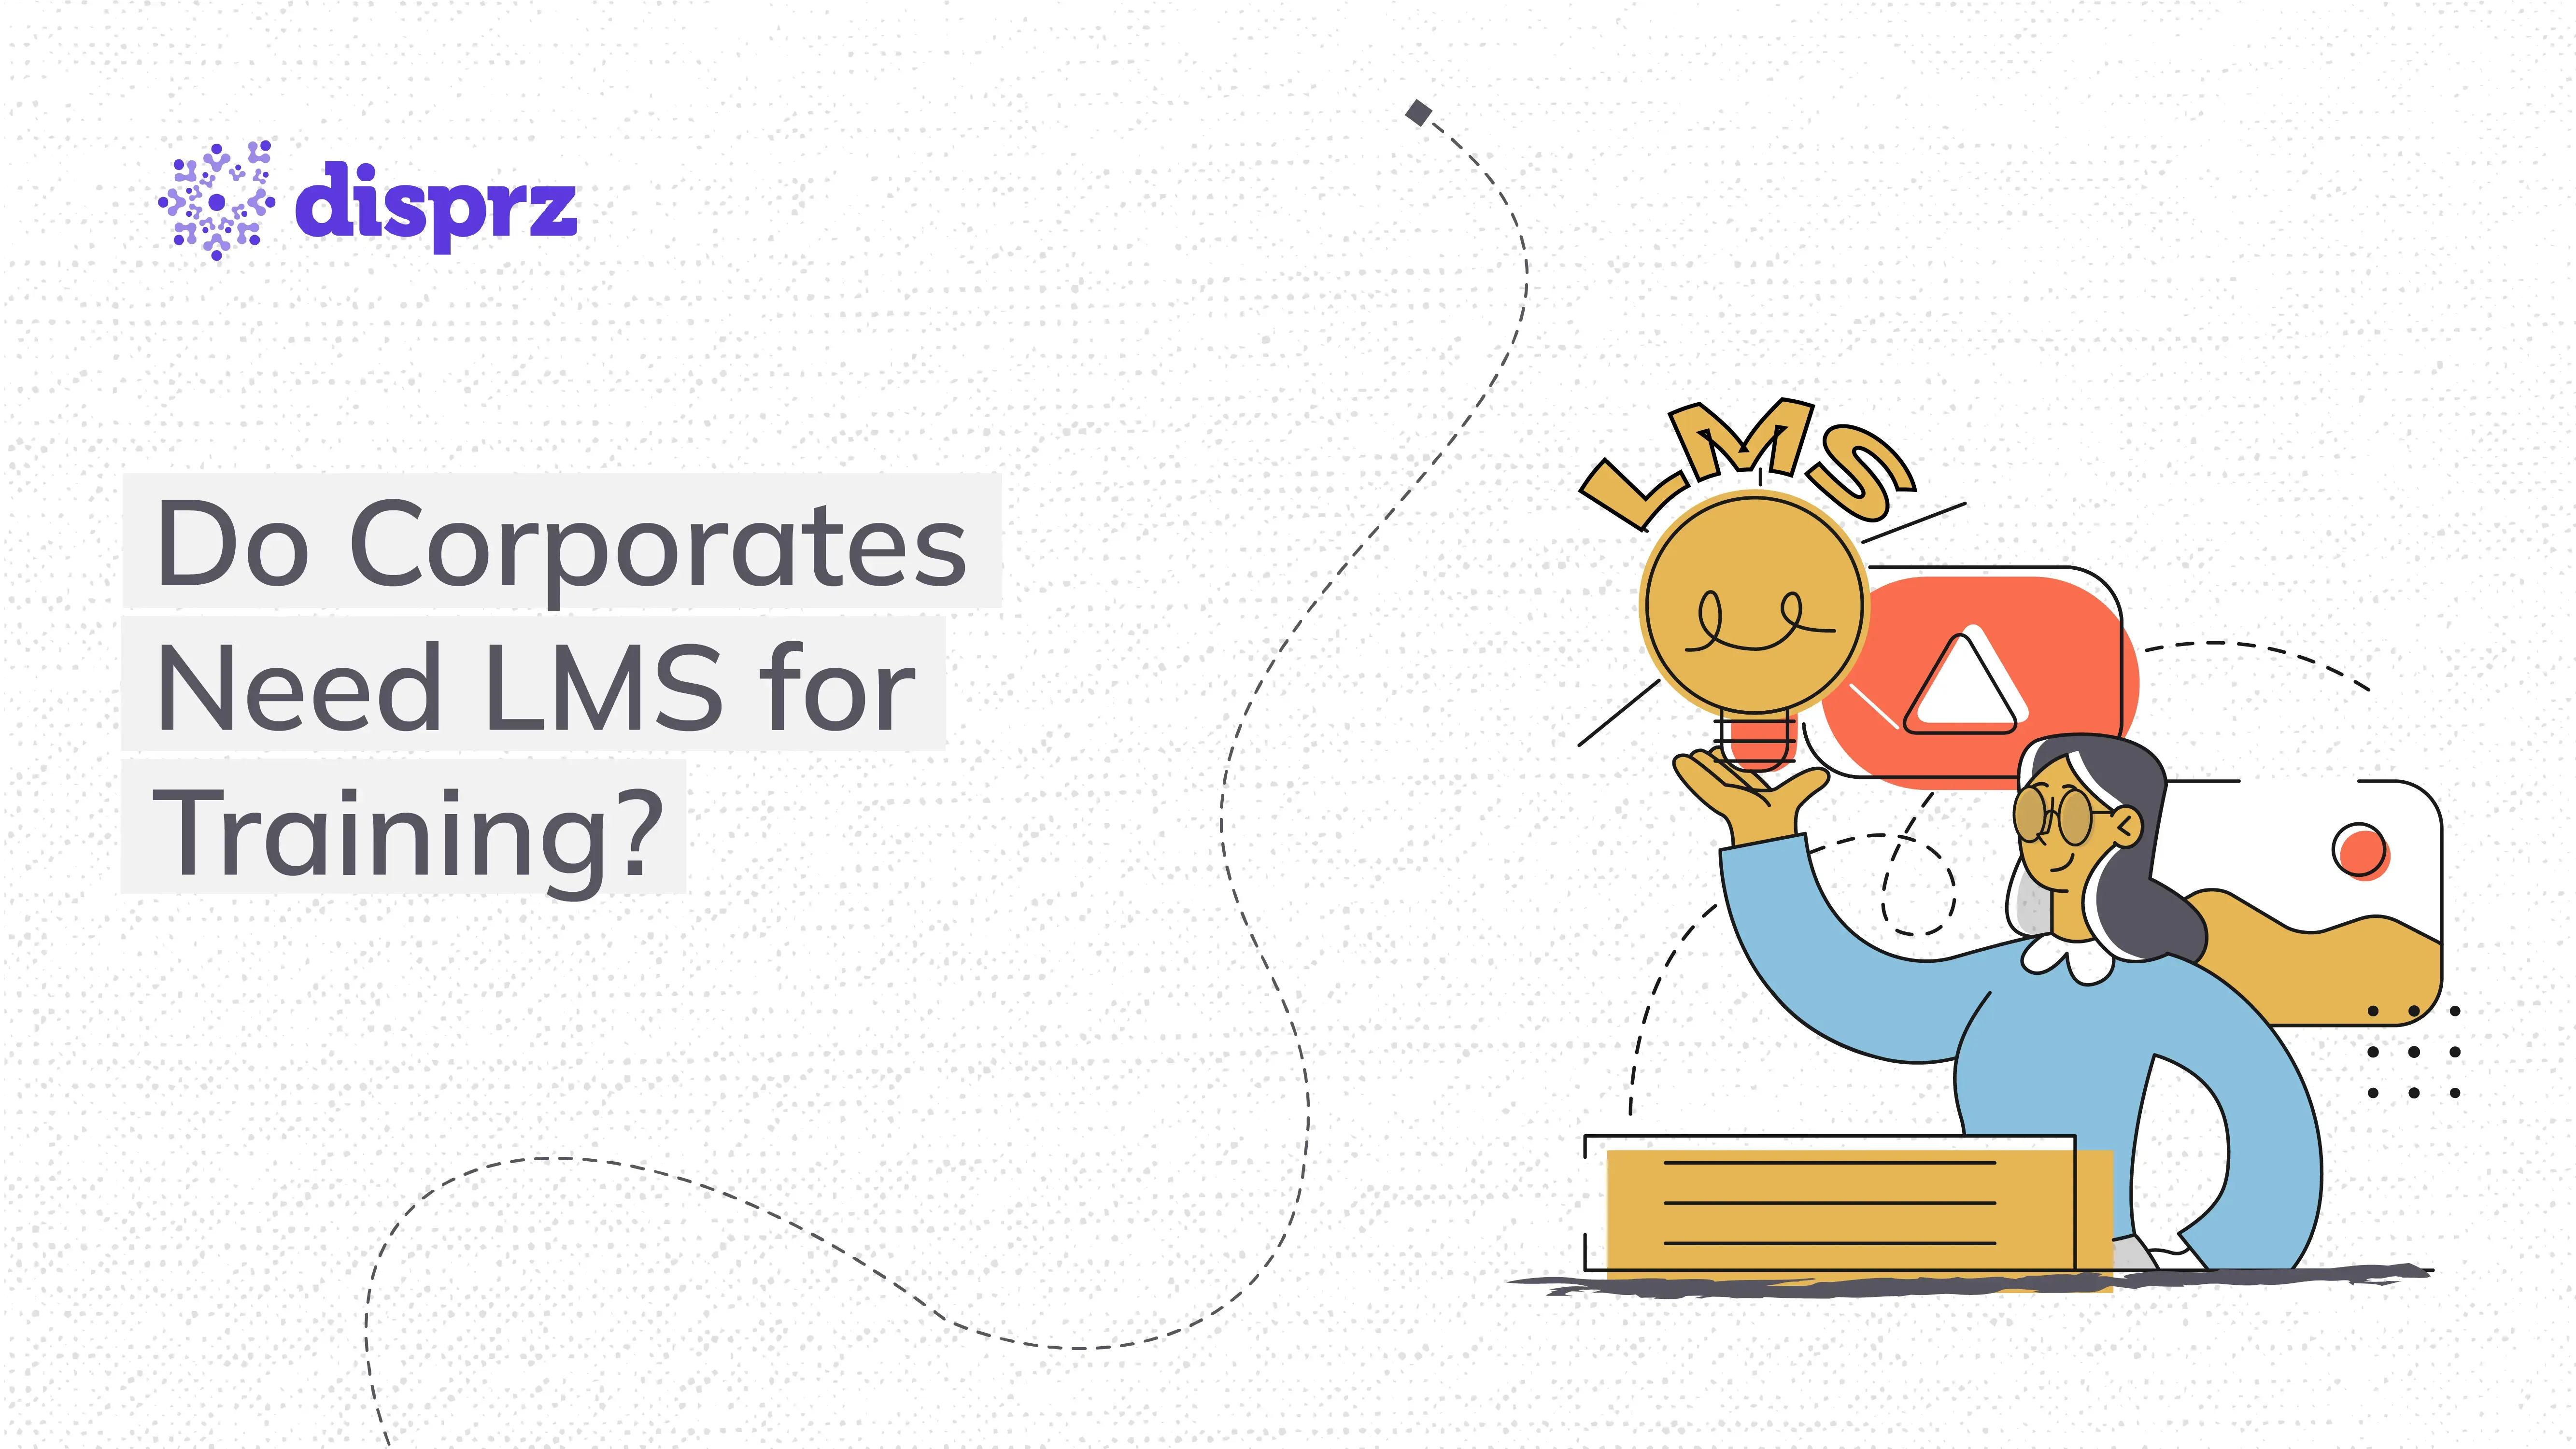 Do Corporates Need LMS for Training